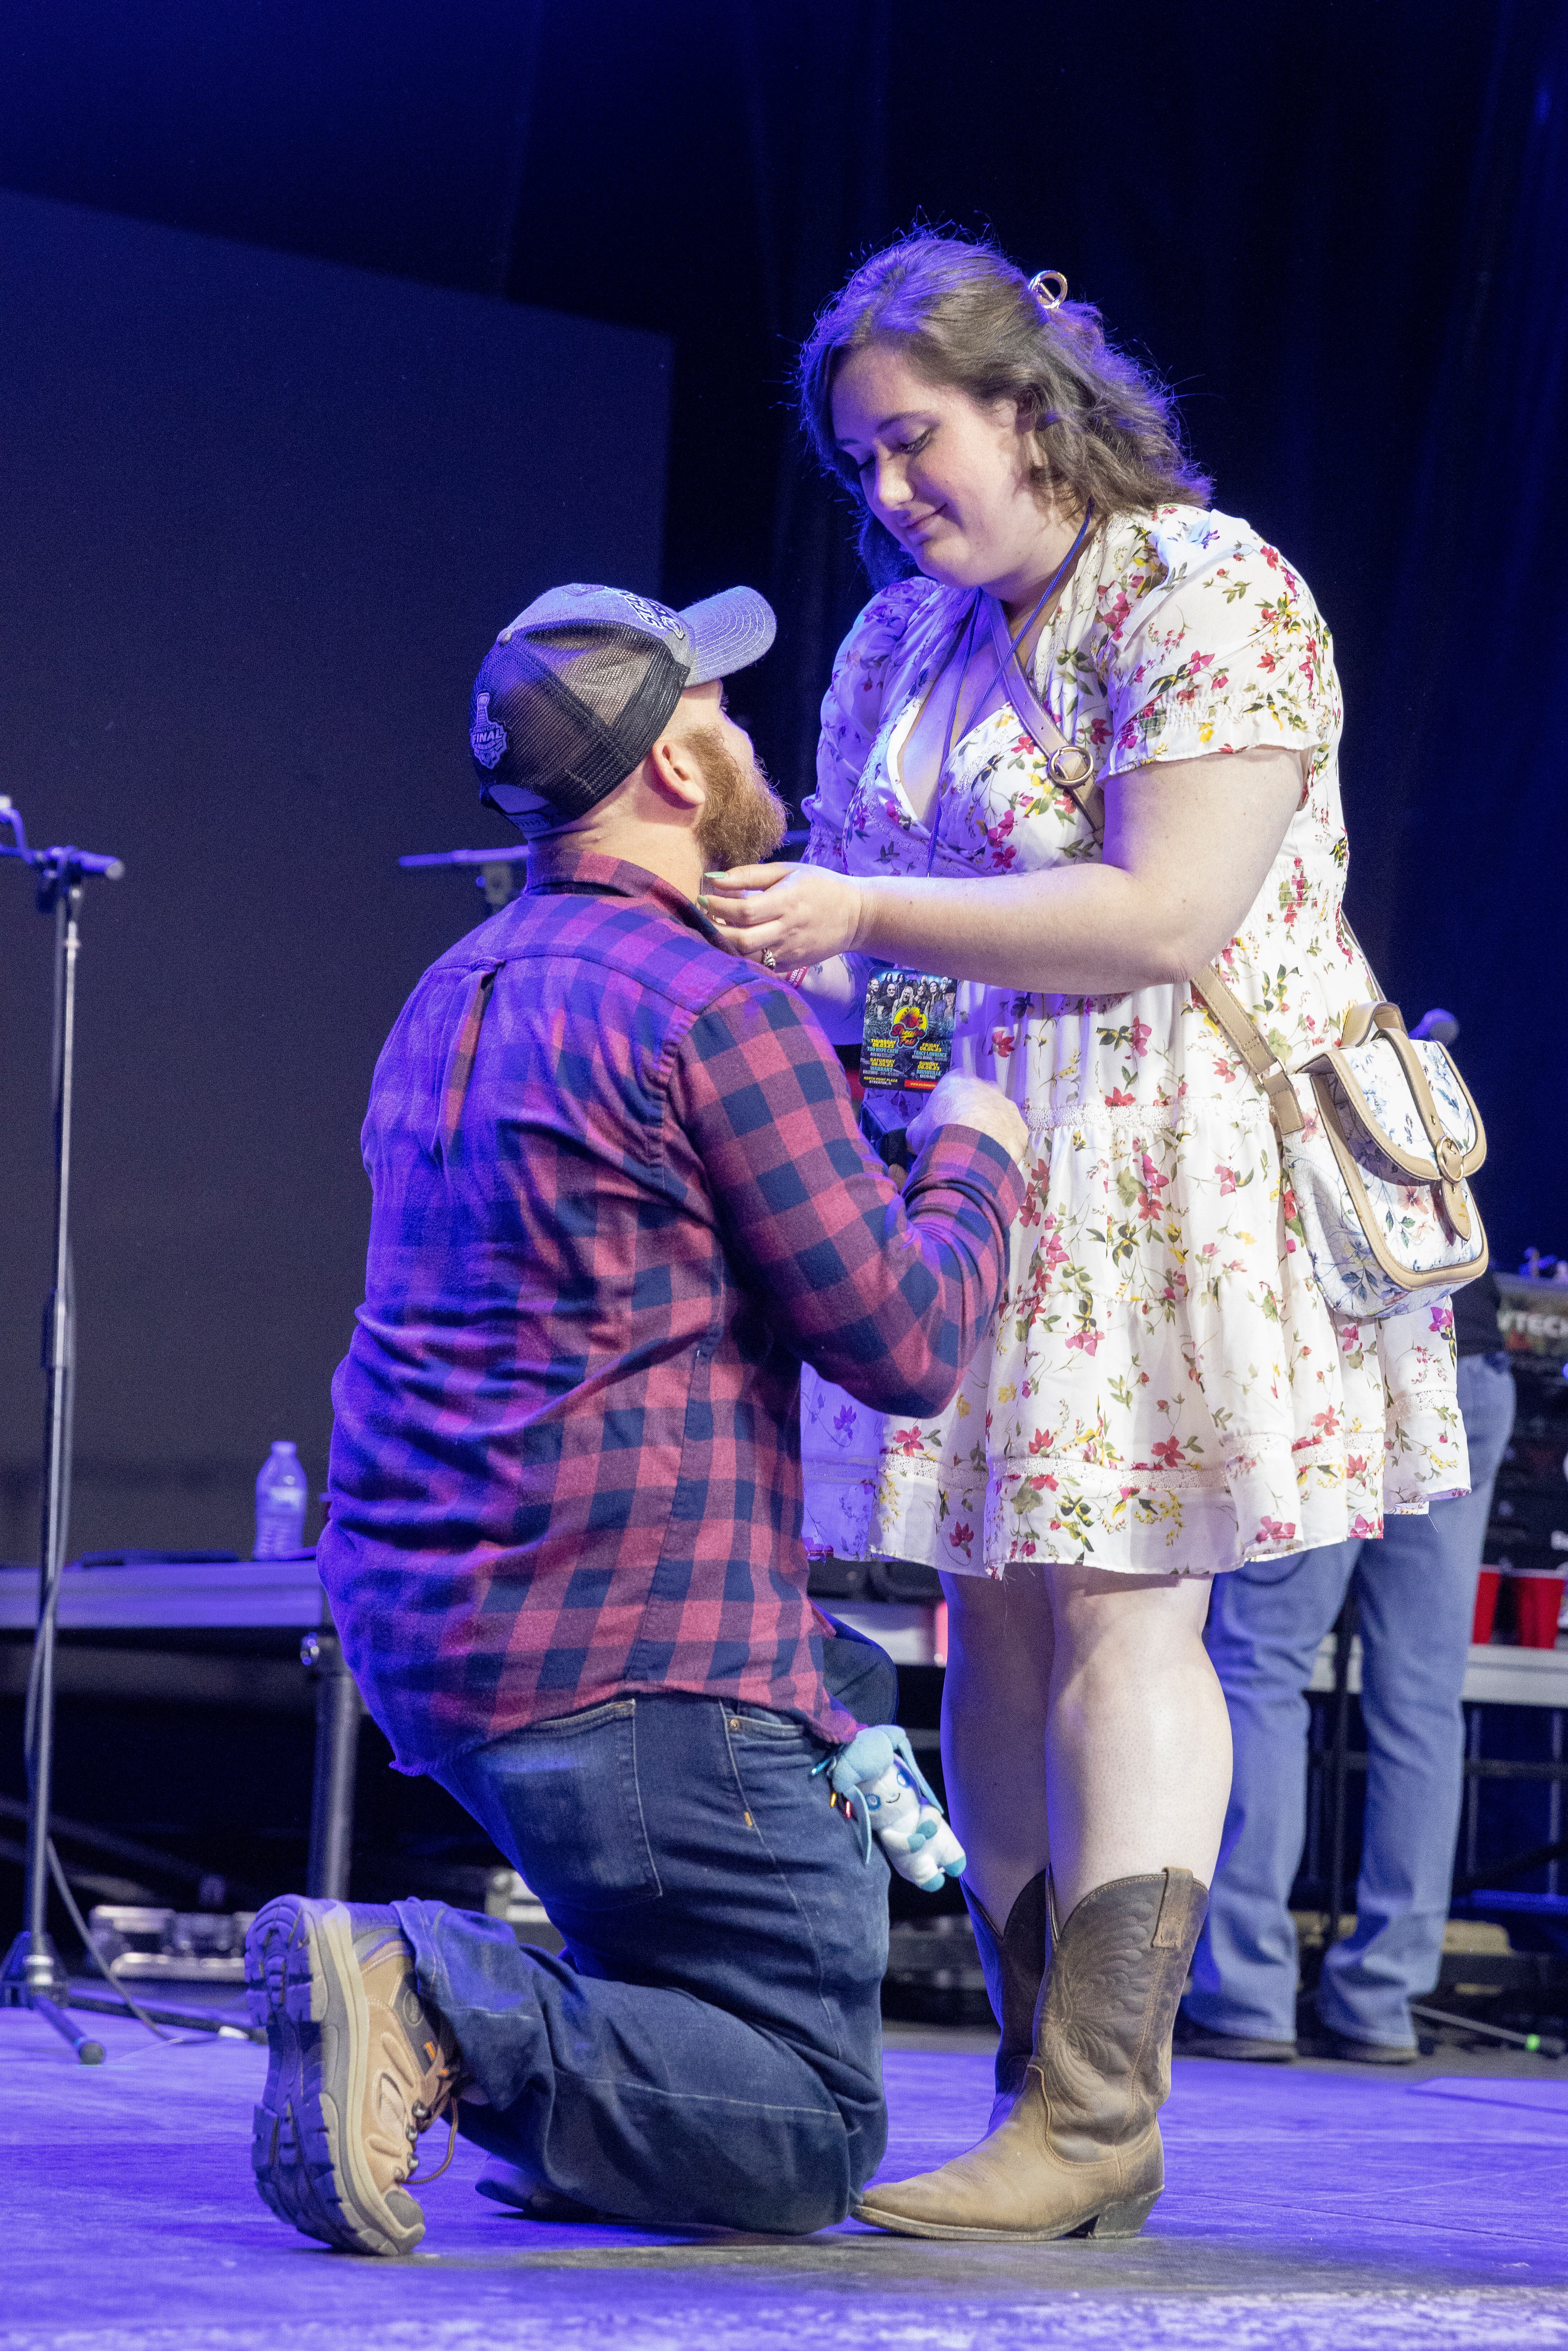 Blake Gabehart gives a surprise onstage proposal to Tessa Nelson on Friday, Aug. 4, 2023, at Streator Fest prior to Tracy Lawrence performing.